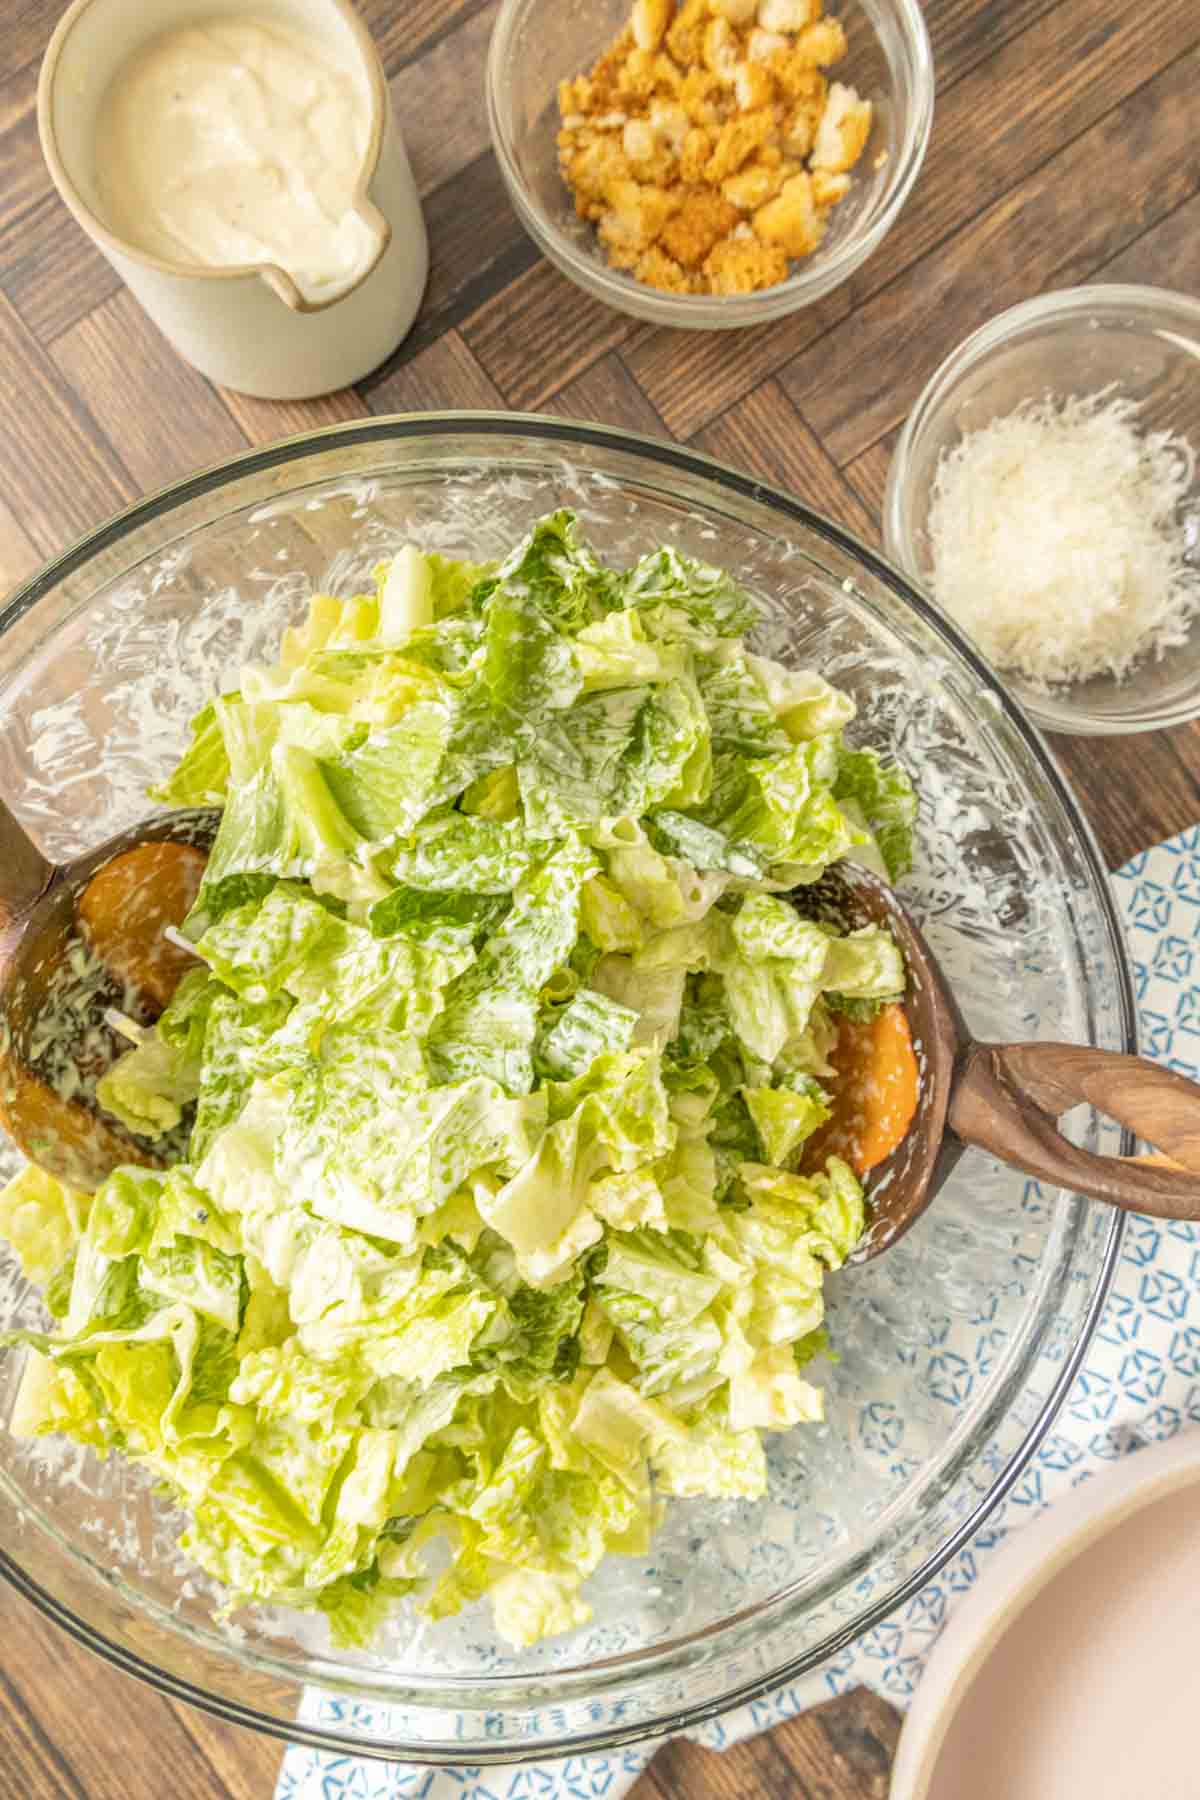 Romaine lettuce in a glass mixing bowl being tossed with Caesar dressing.